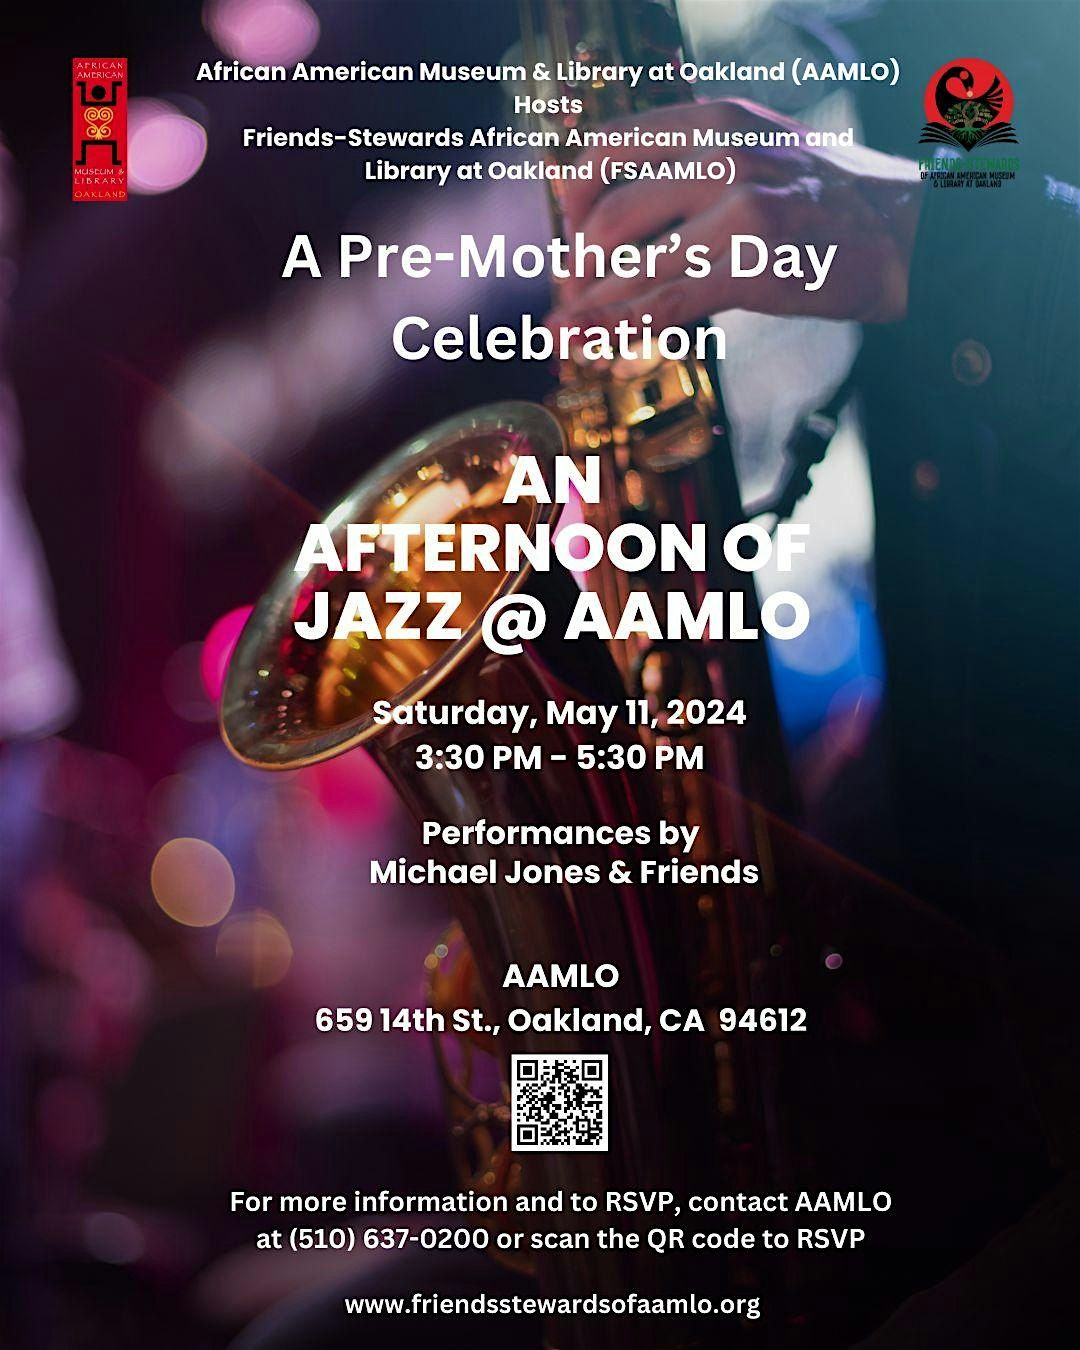 A Pre-Mother's Day Celebration - An Afternoon of Jazz @ AAMLO